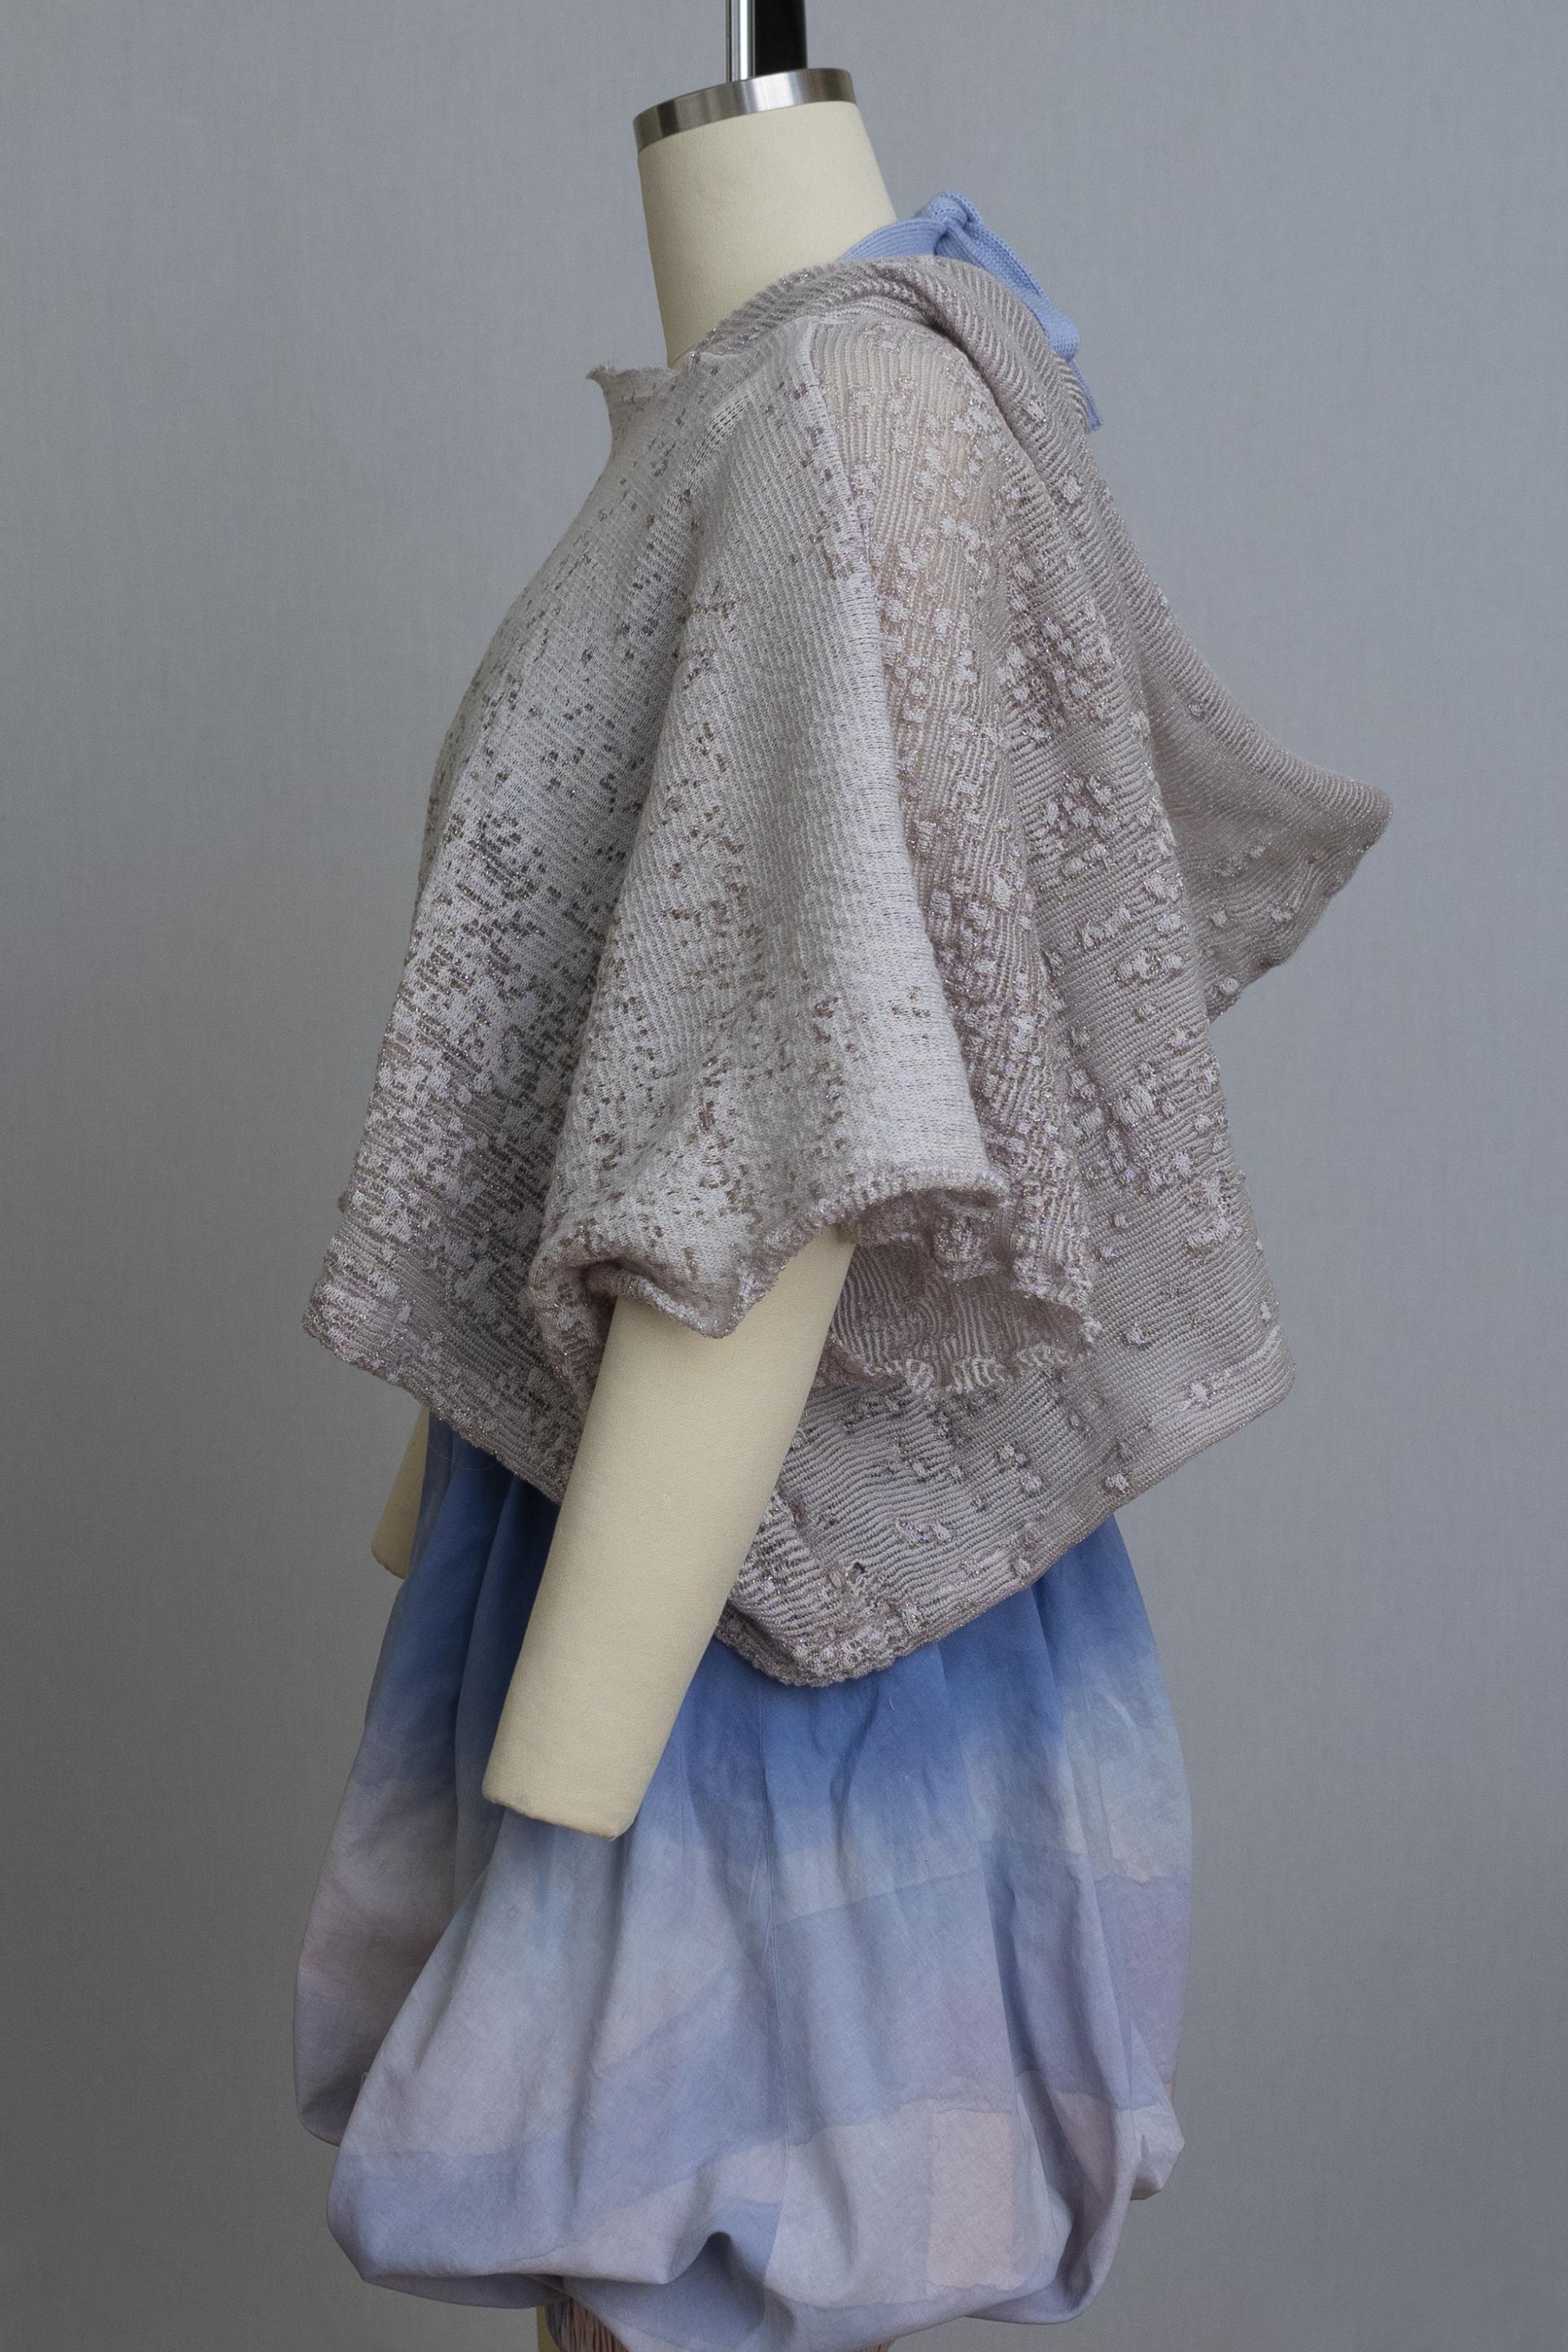 dress form wearing bloomers and a grey knit hooded sweater